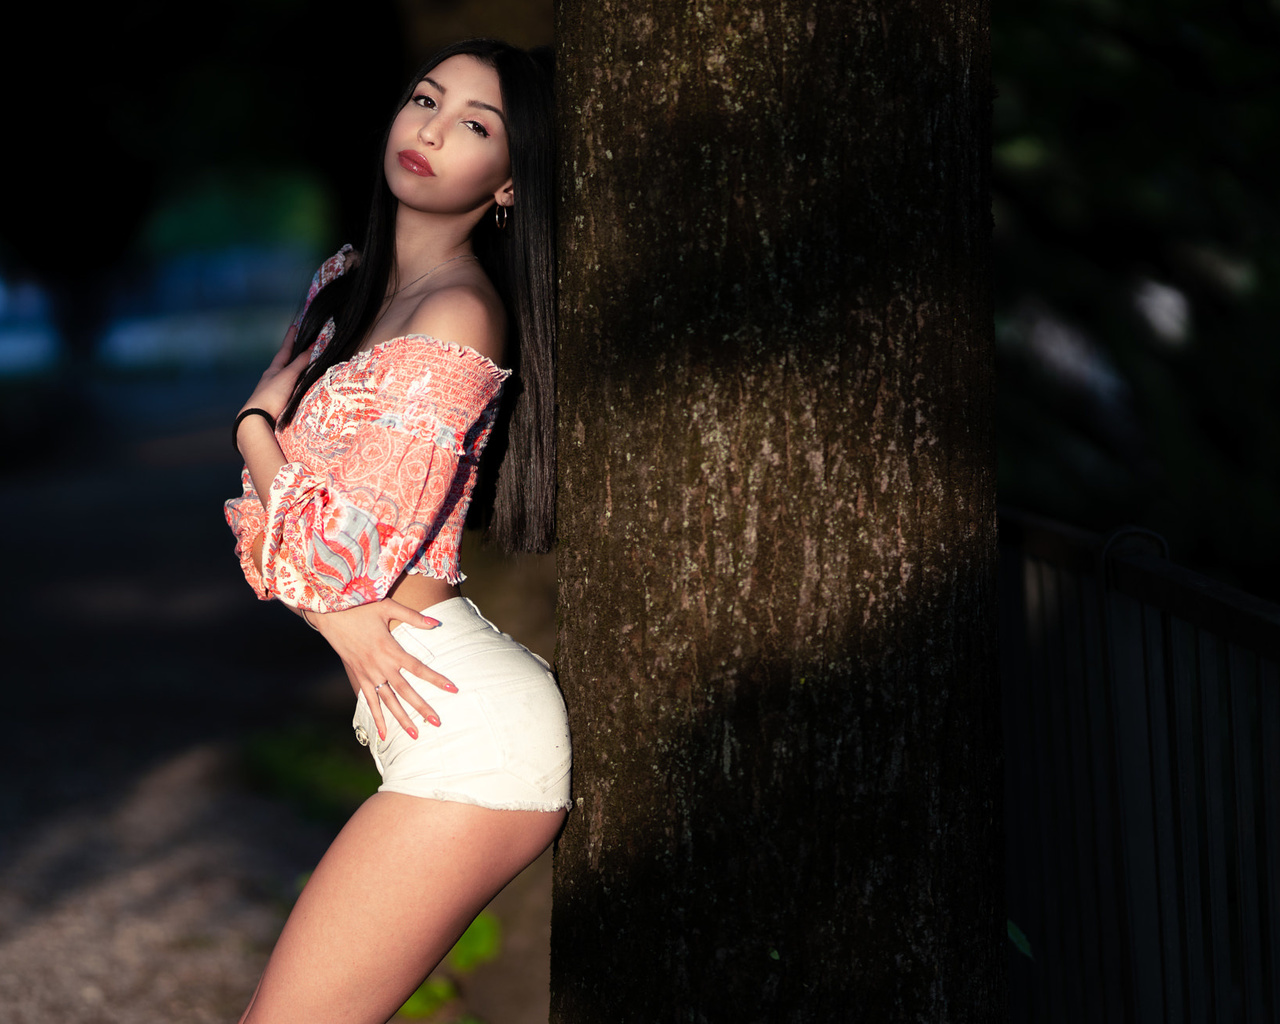 women, marco squassina, jean shorts, straight hair, trees, bare shoulders, ass, pink nails, portrait